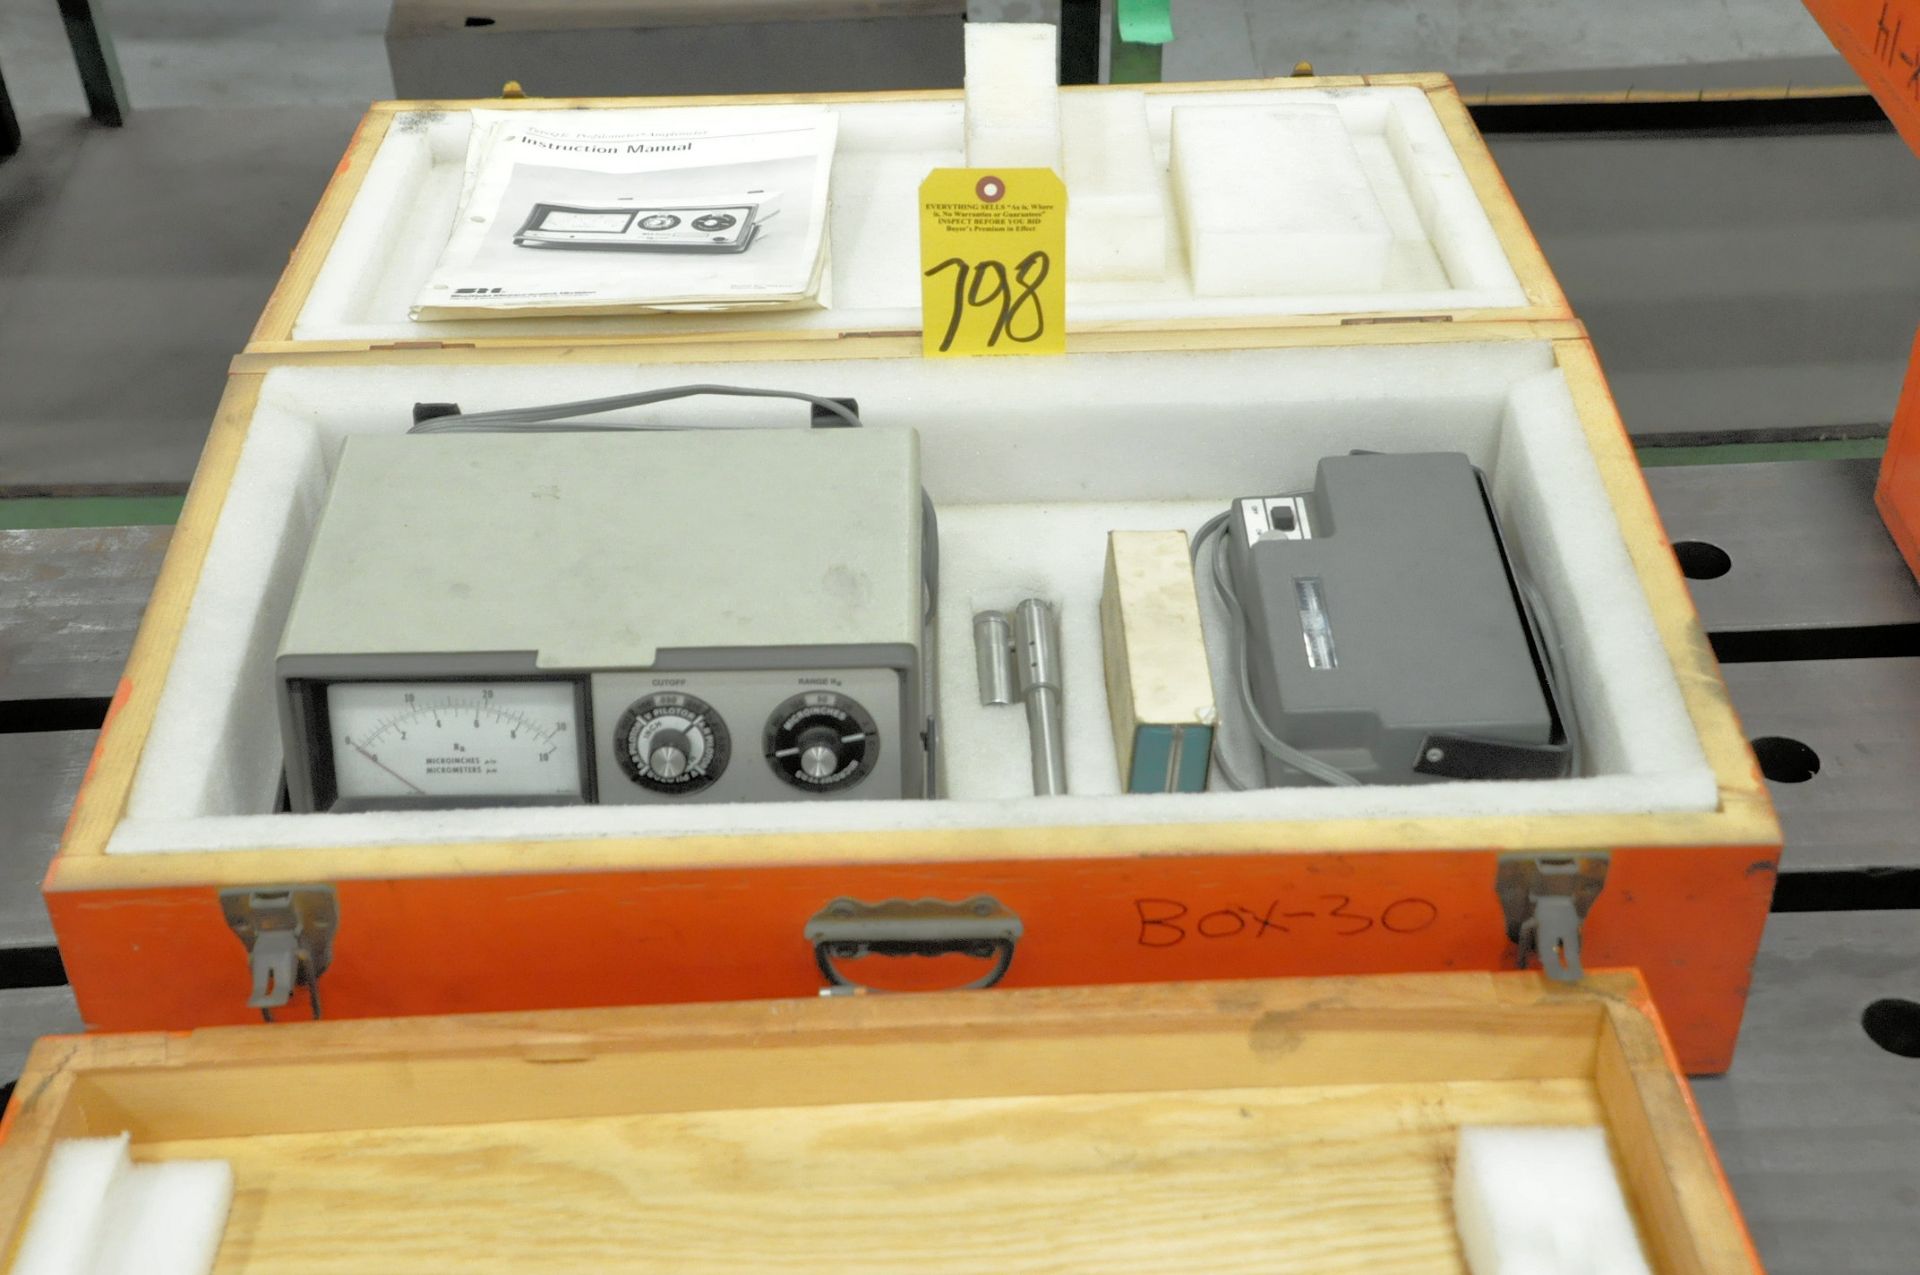 Sheffield Type QE Profilometer Amplimeter with Case